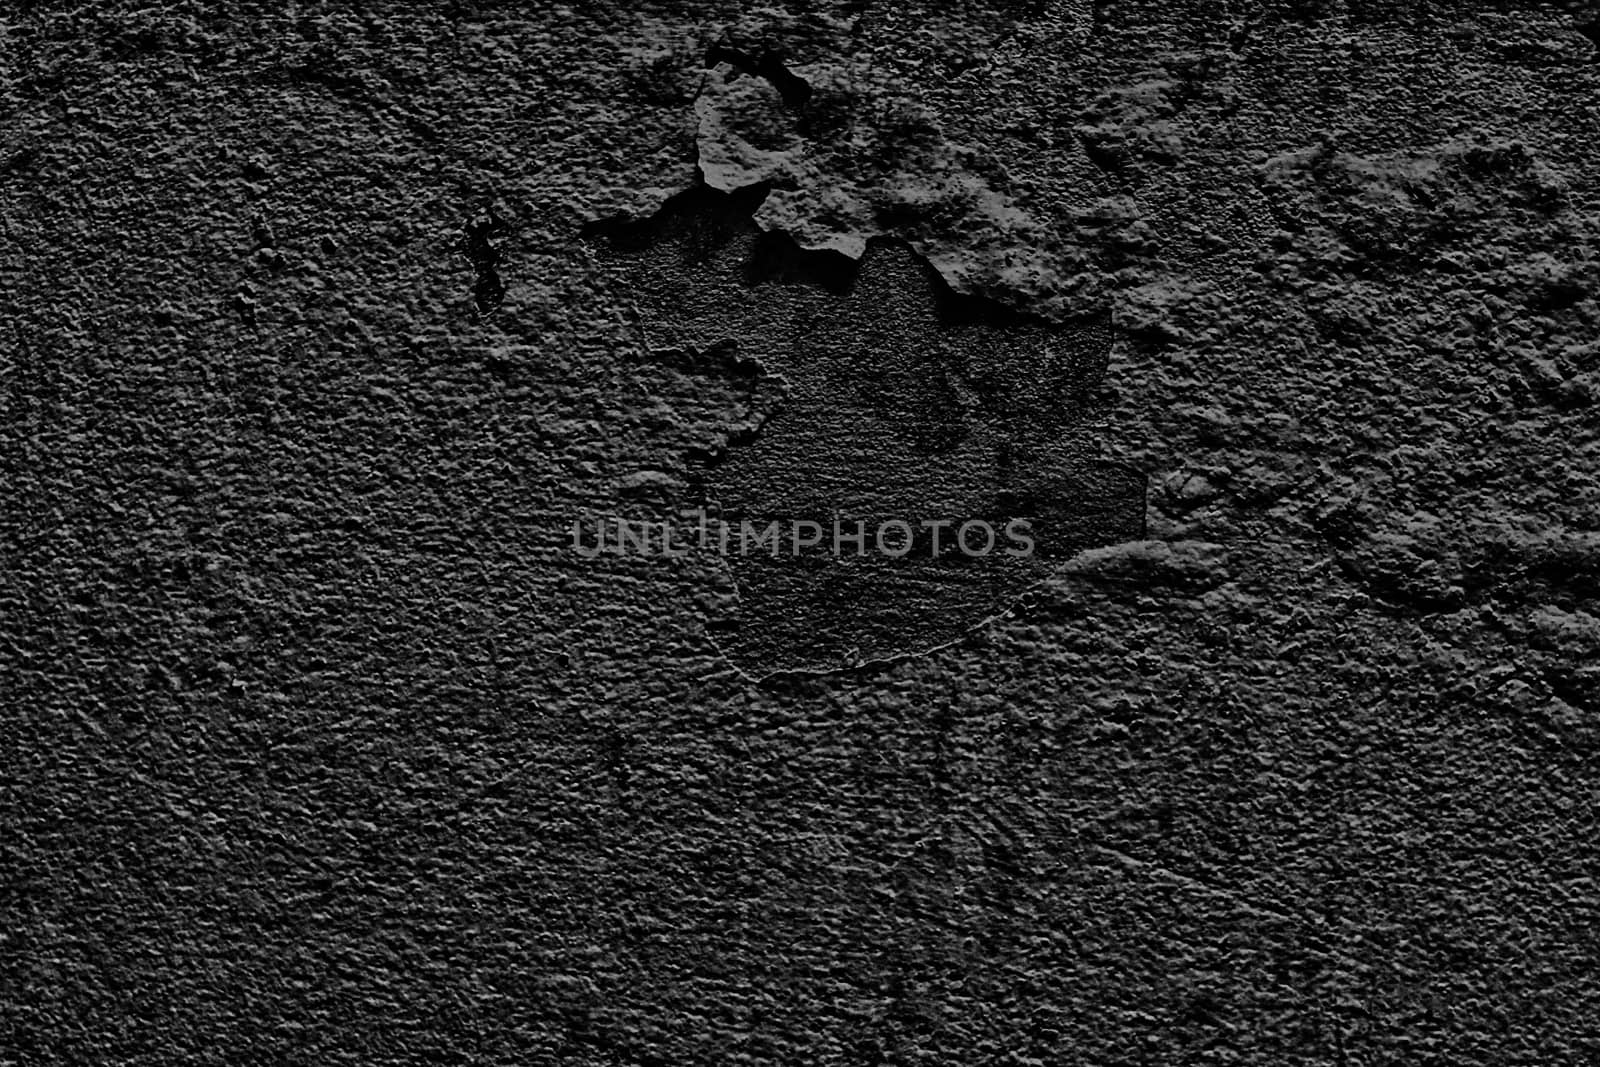 Black color Paint peeling cuticles on textured Wall plaster Siemens, Background Cracked walls inbreeding, Abstract wall Black background texture